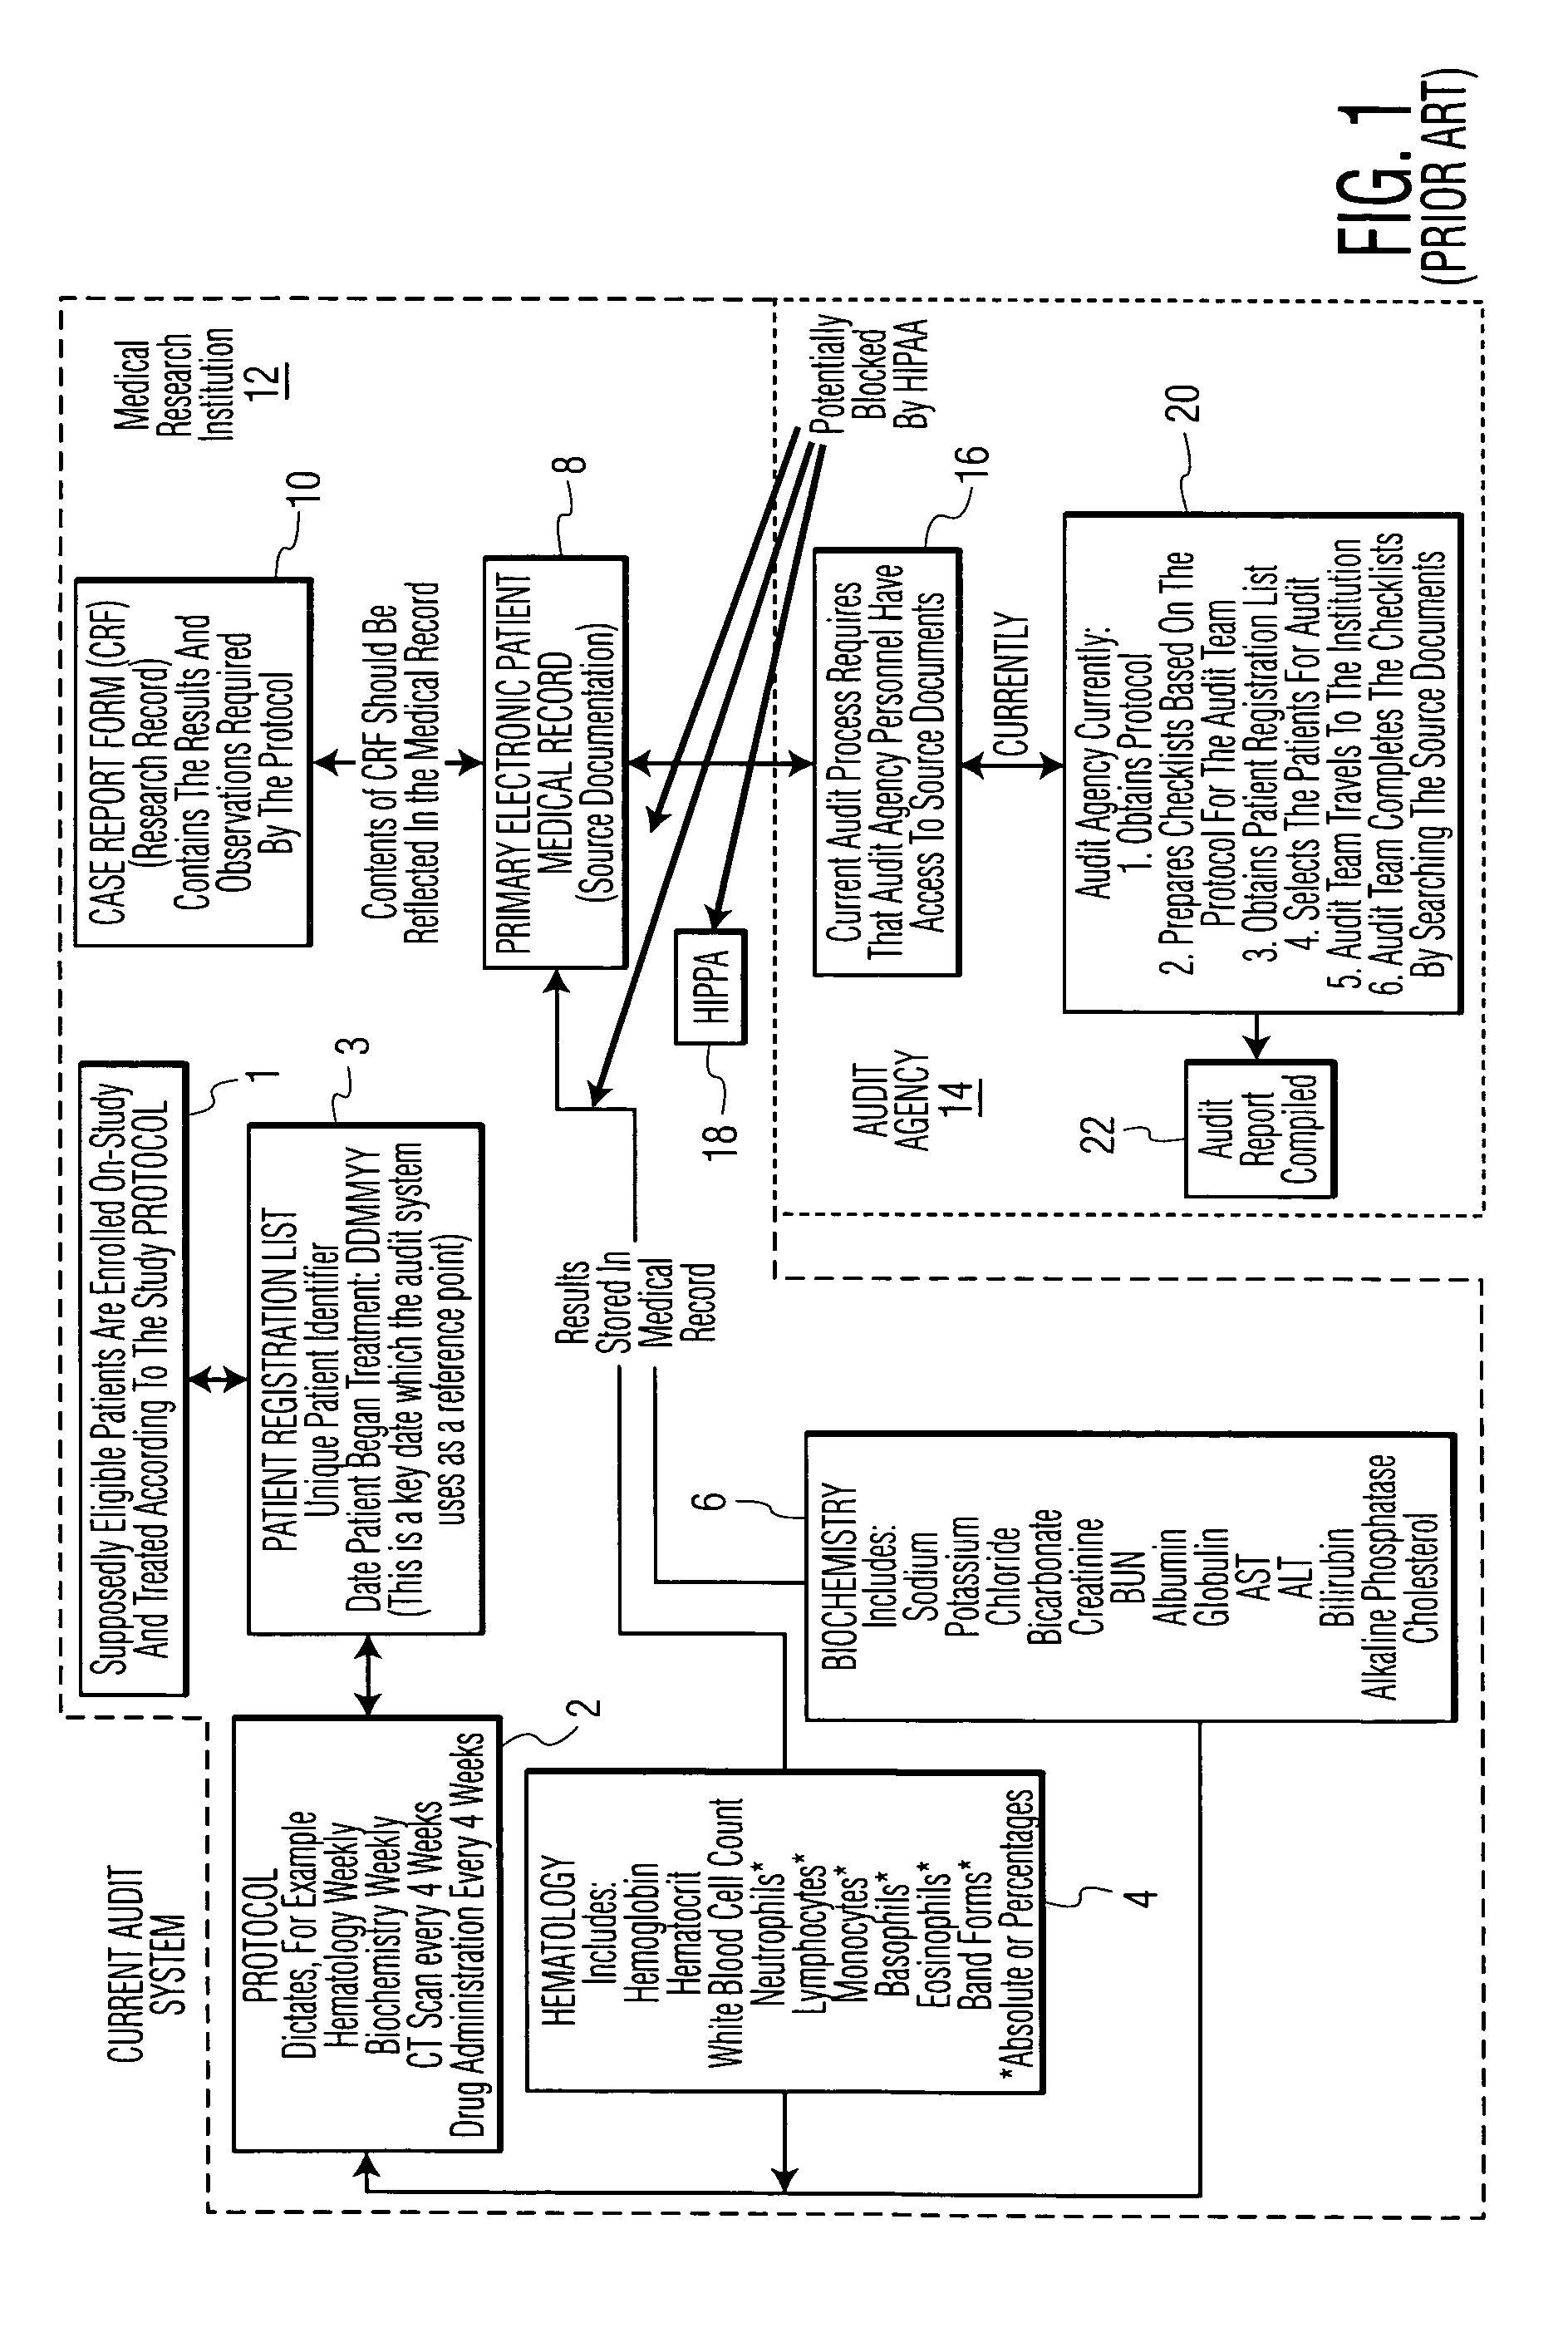 Method and system for maintaining HIPAA patient privacy requirements during auditing of electronic patient medical records